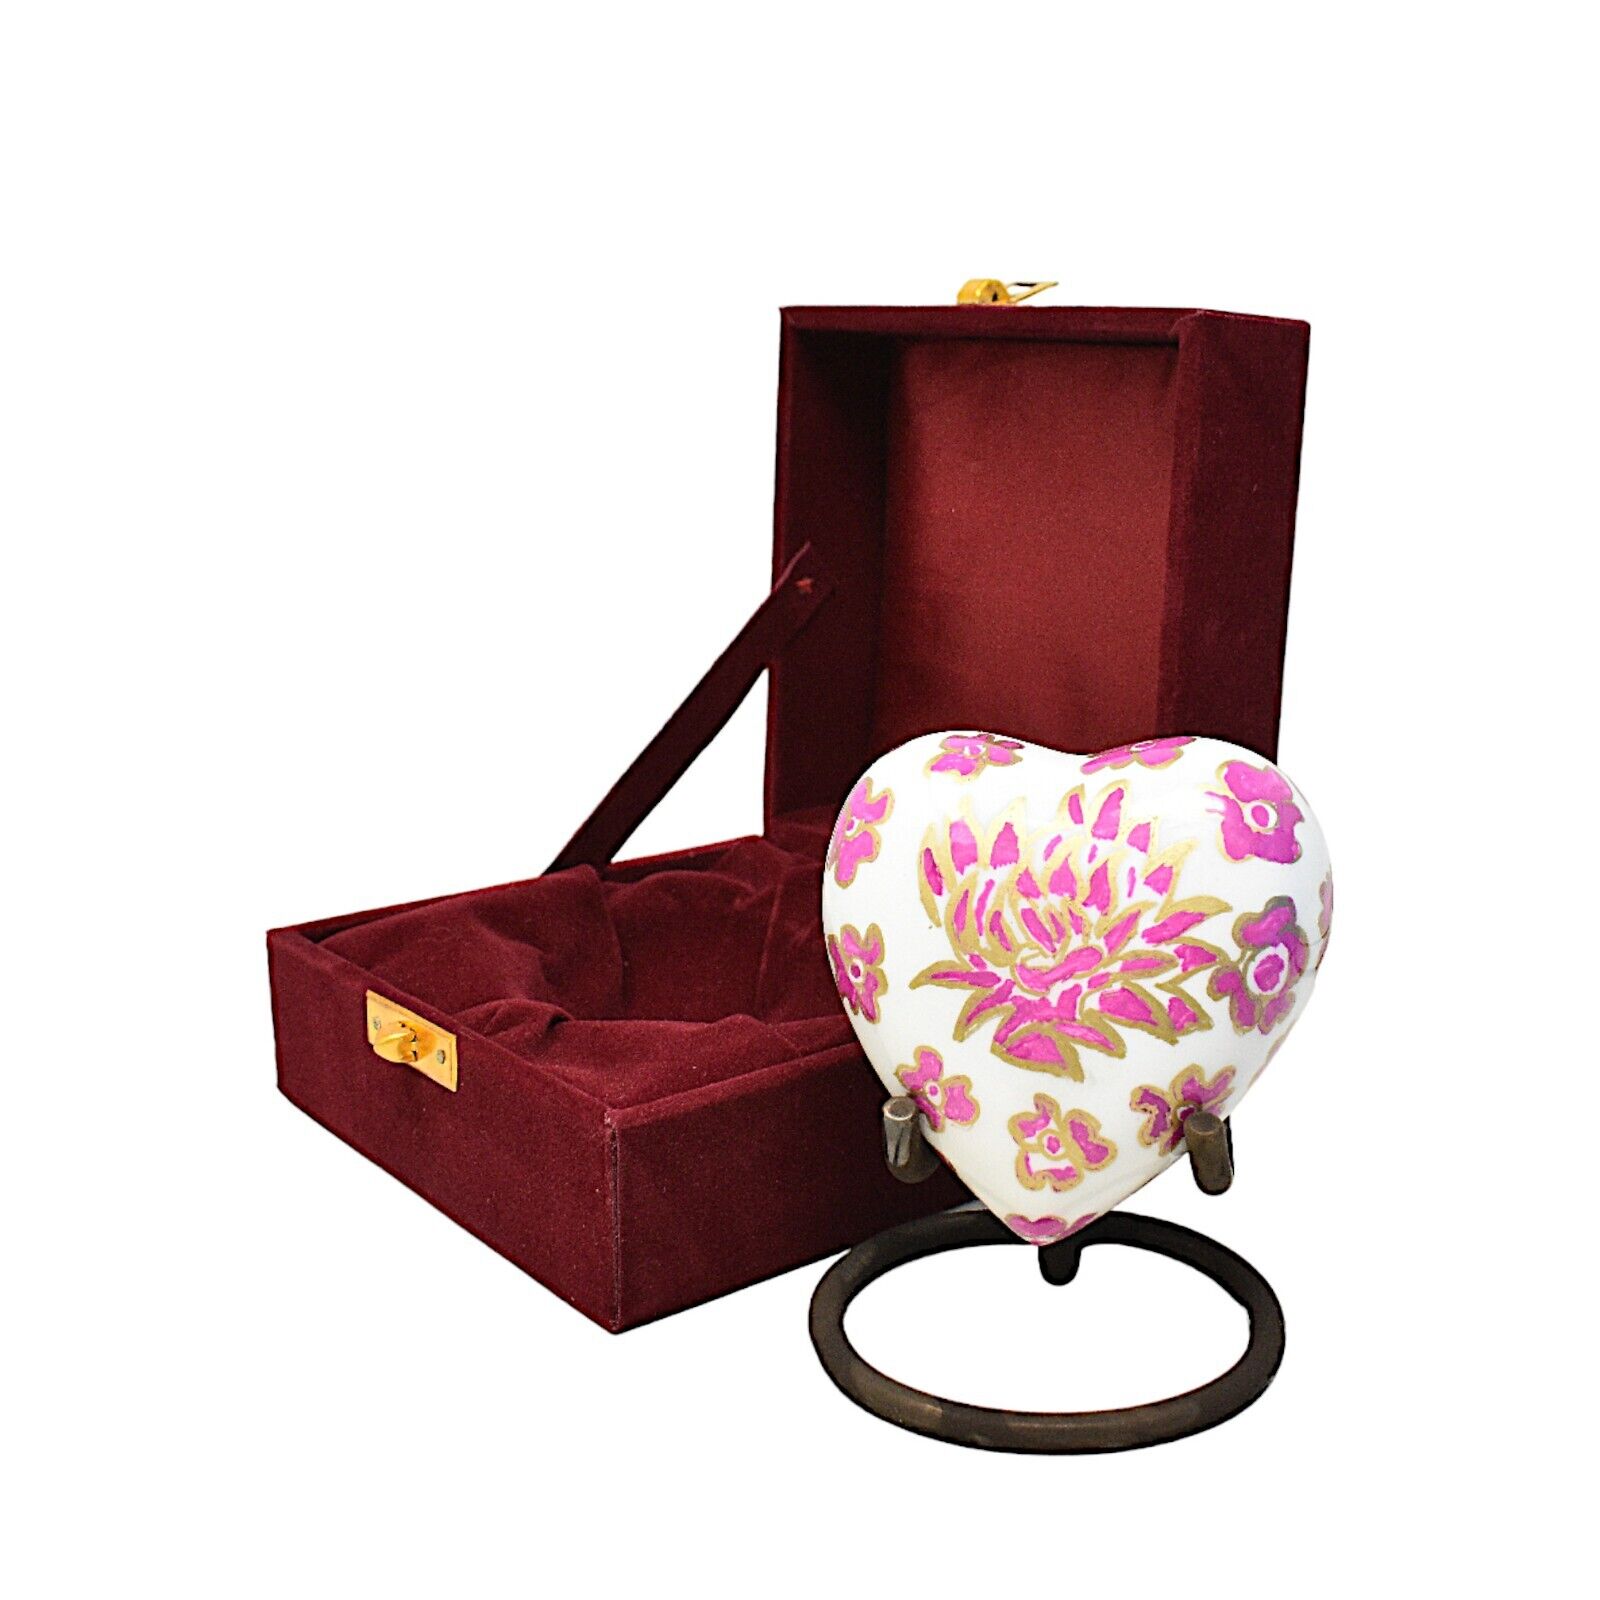 Handcrafted Premium Cremation Heart Urn 3 Inch Memorial Urn Gift for Your Love